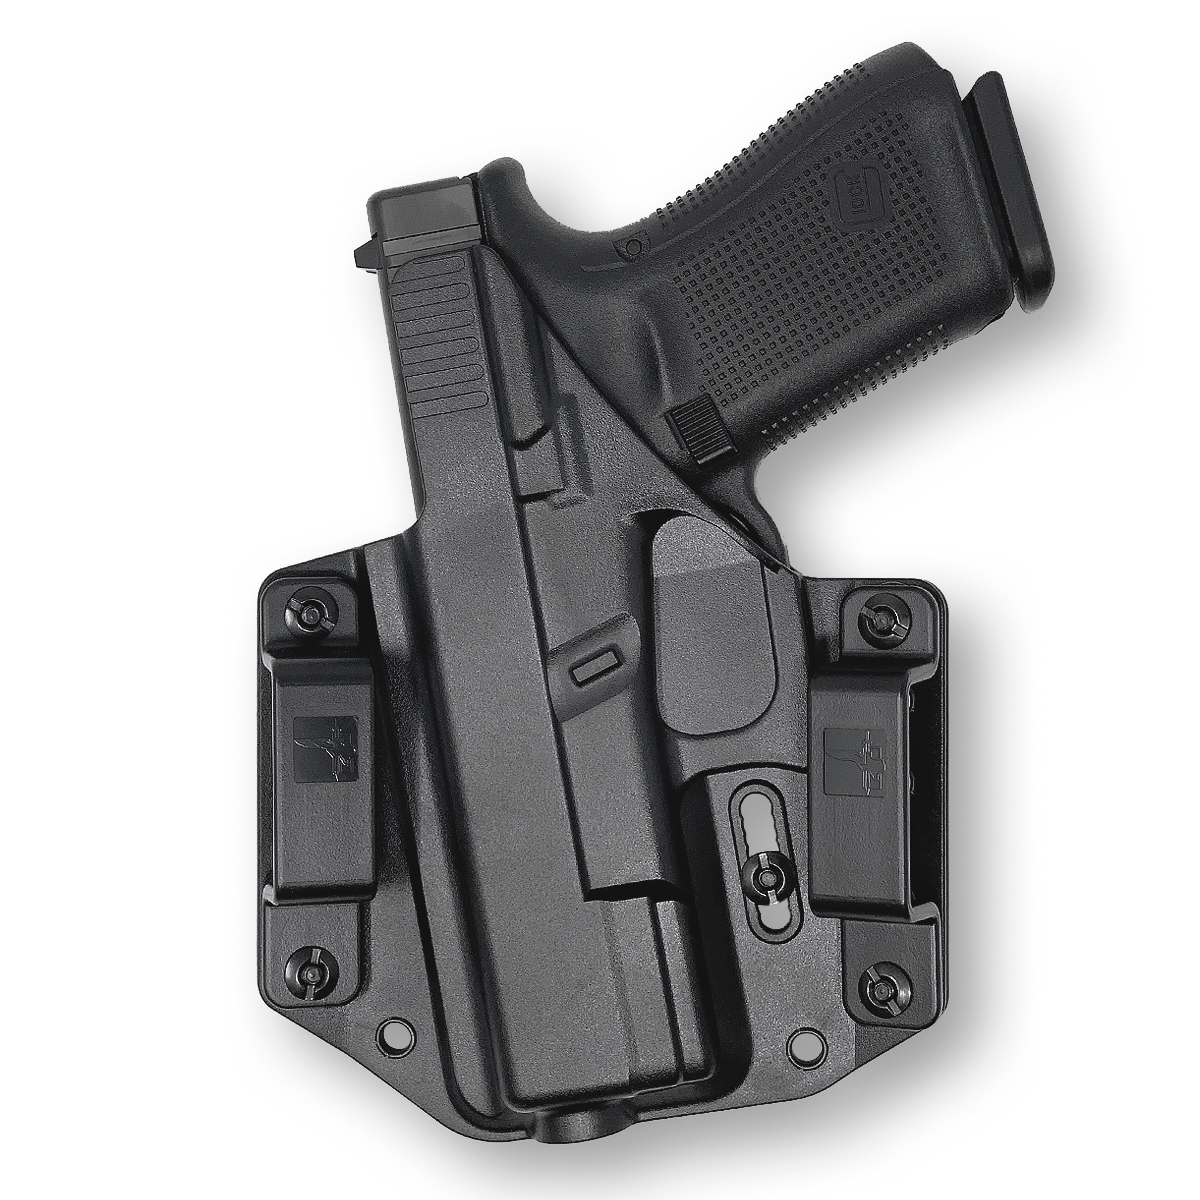 Details about   OWB PADDLE HOLSTERS-LEVEL 2 THUMB SMART-KYDEX-S&W M&P SHIELD  W/ FREE MAG POUCH 